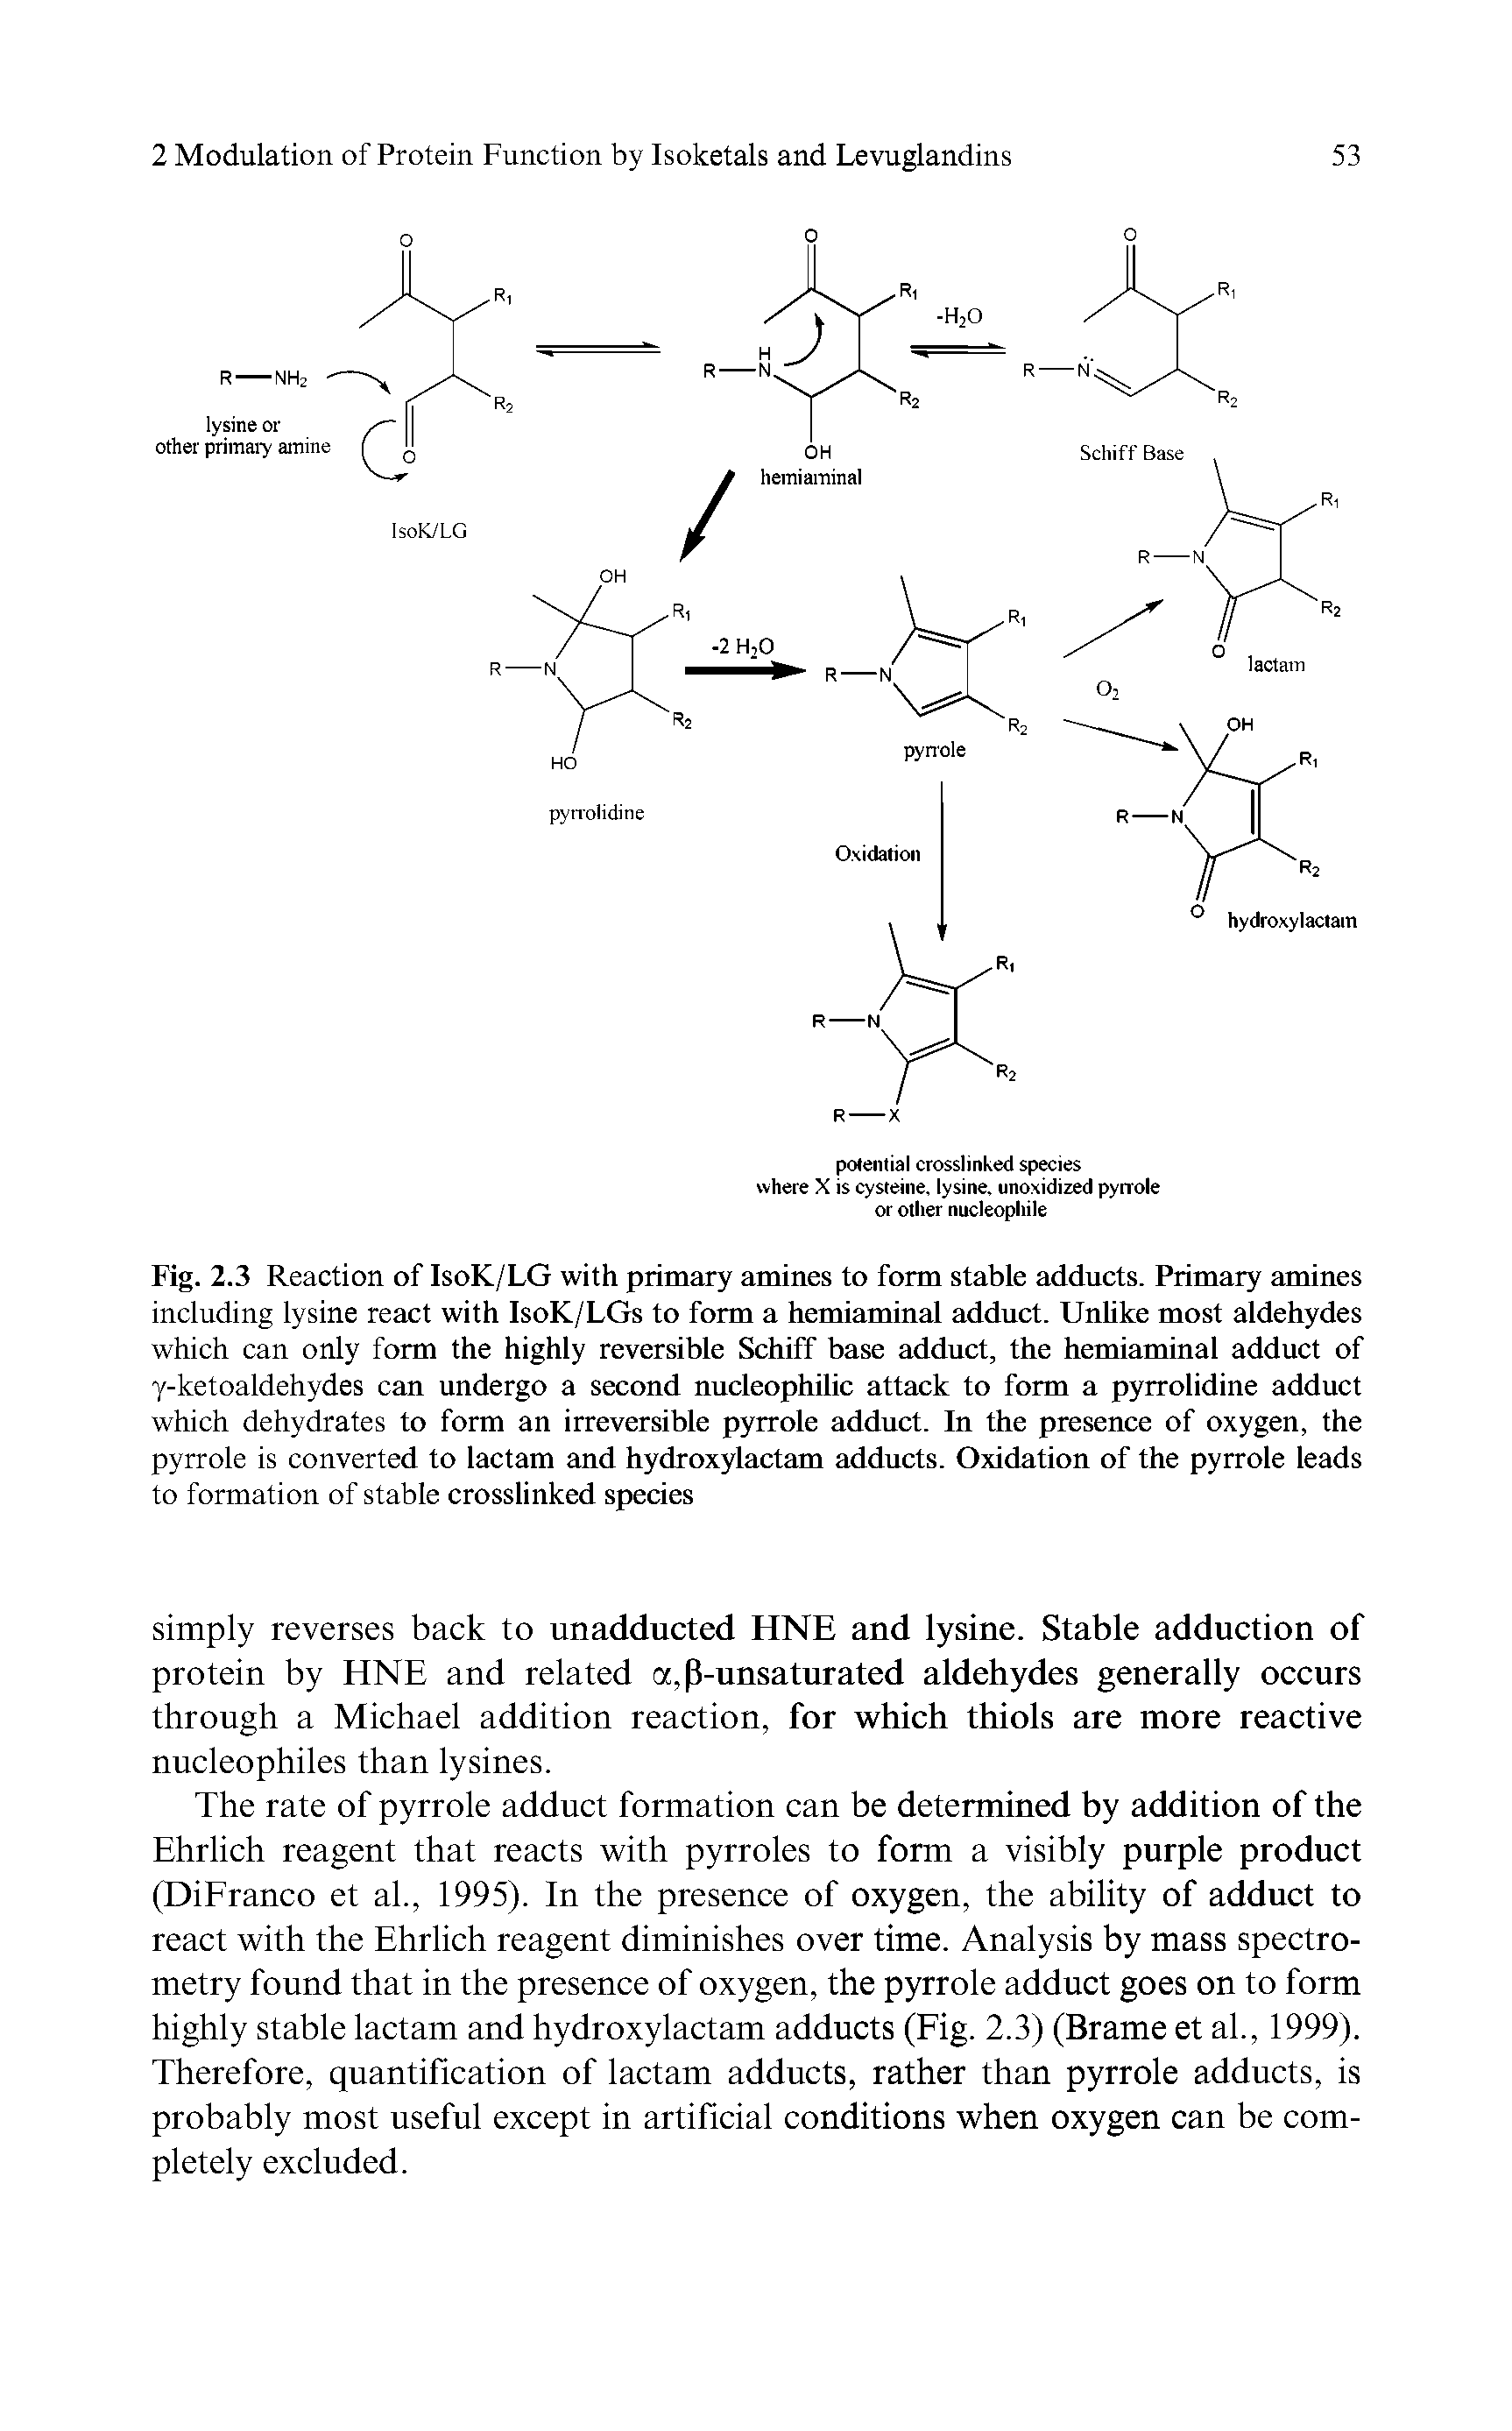 Fig. 2.3 Reaction of IsoK/LG with primary amines to form stable adducts. Primary amines including lysine react with IsoK/LGs to form a hemiaminal adduct. Unlike most aldehydes which can only form the highly reversible Schiff base adduct, the hemiaminal adduct of y-ketoaldehydes can undergo a second nucleophilic attack to form a pyrrolidine adduct which dehydrates to form an irreversible pyrrole adduct. In the presence of oxygen, the pyrrole is converted to lactam and hydroxylactam adducts. Oxidation of the pyrrole leads to formation of stable crosslinked species...